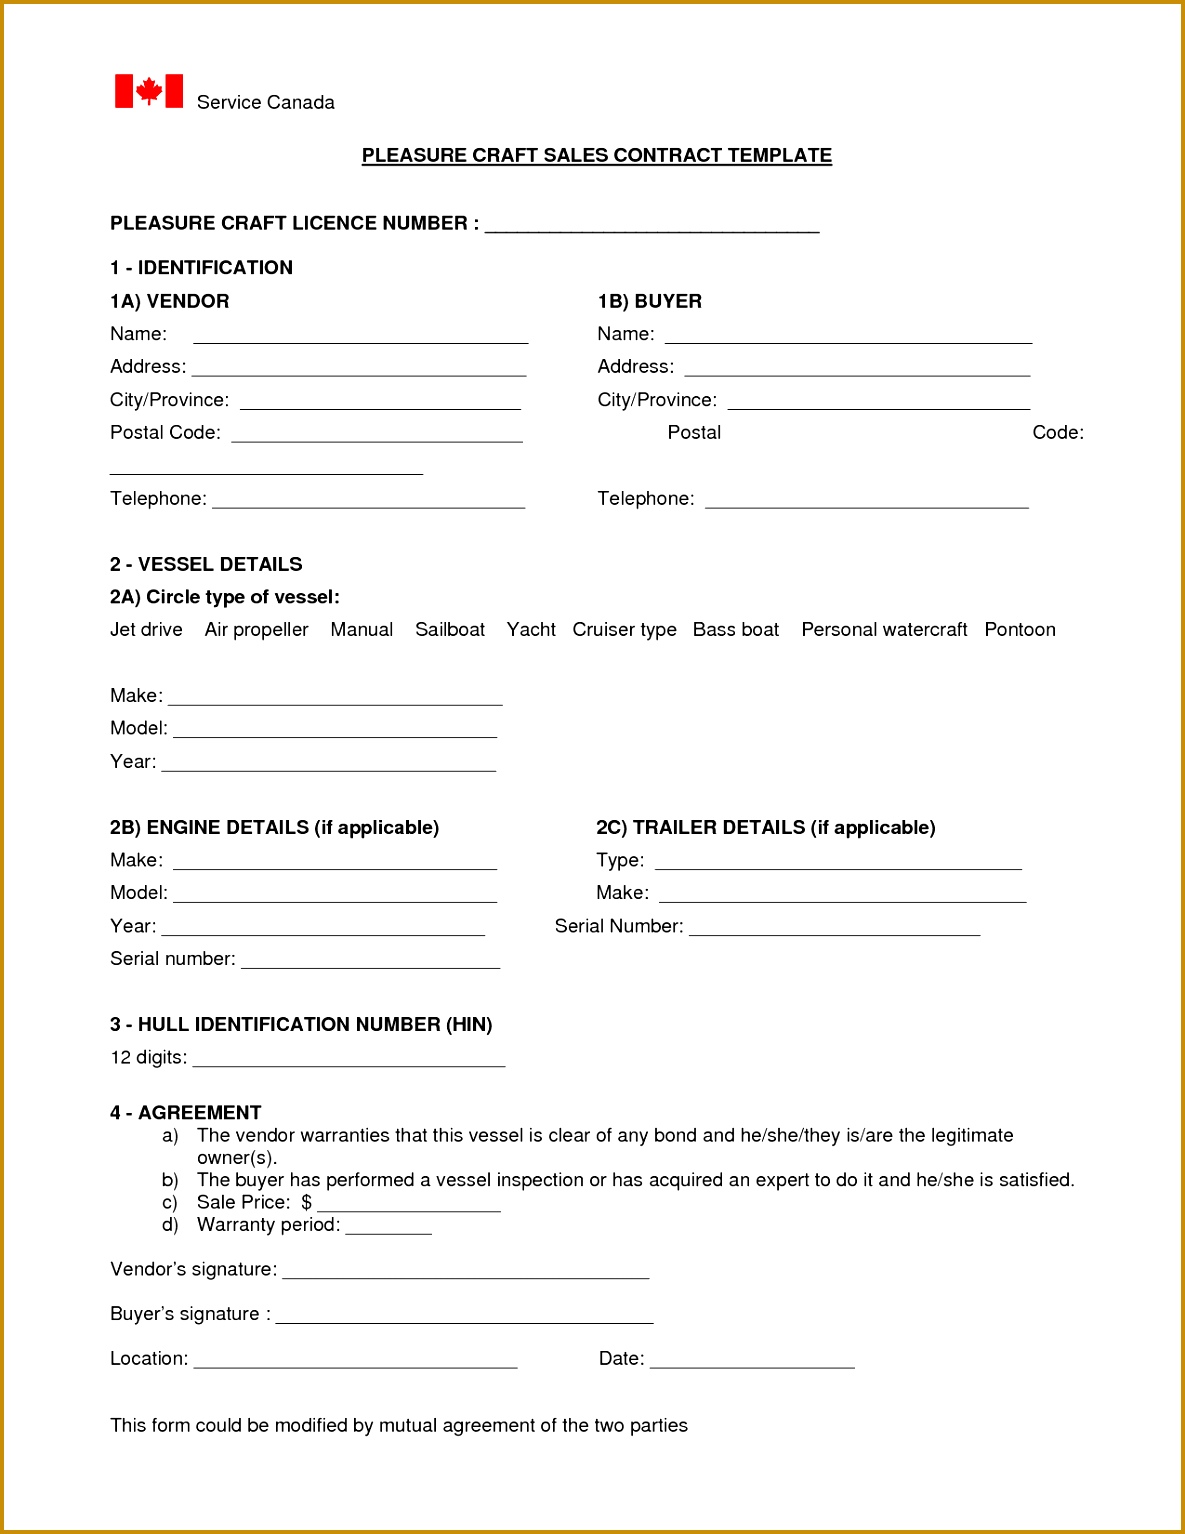 post sales contract template 15341185